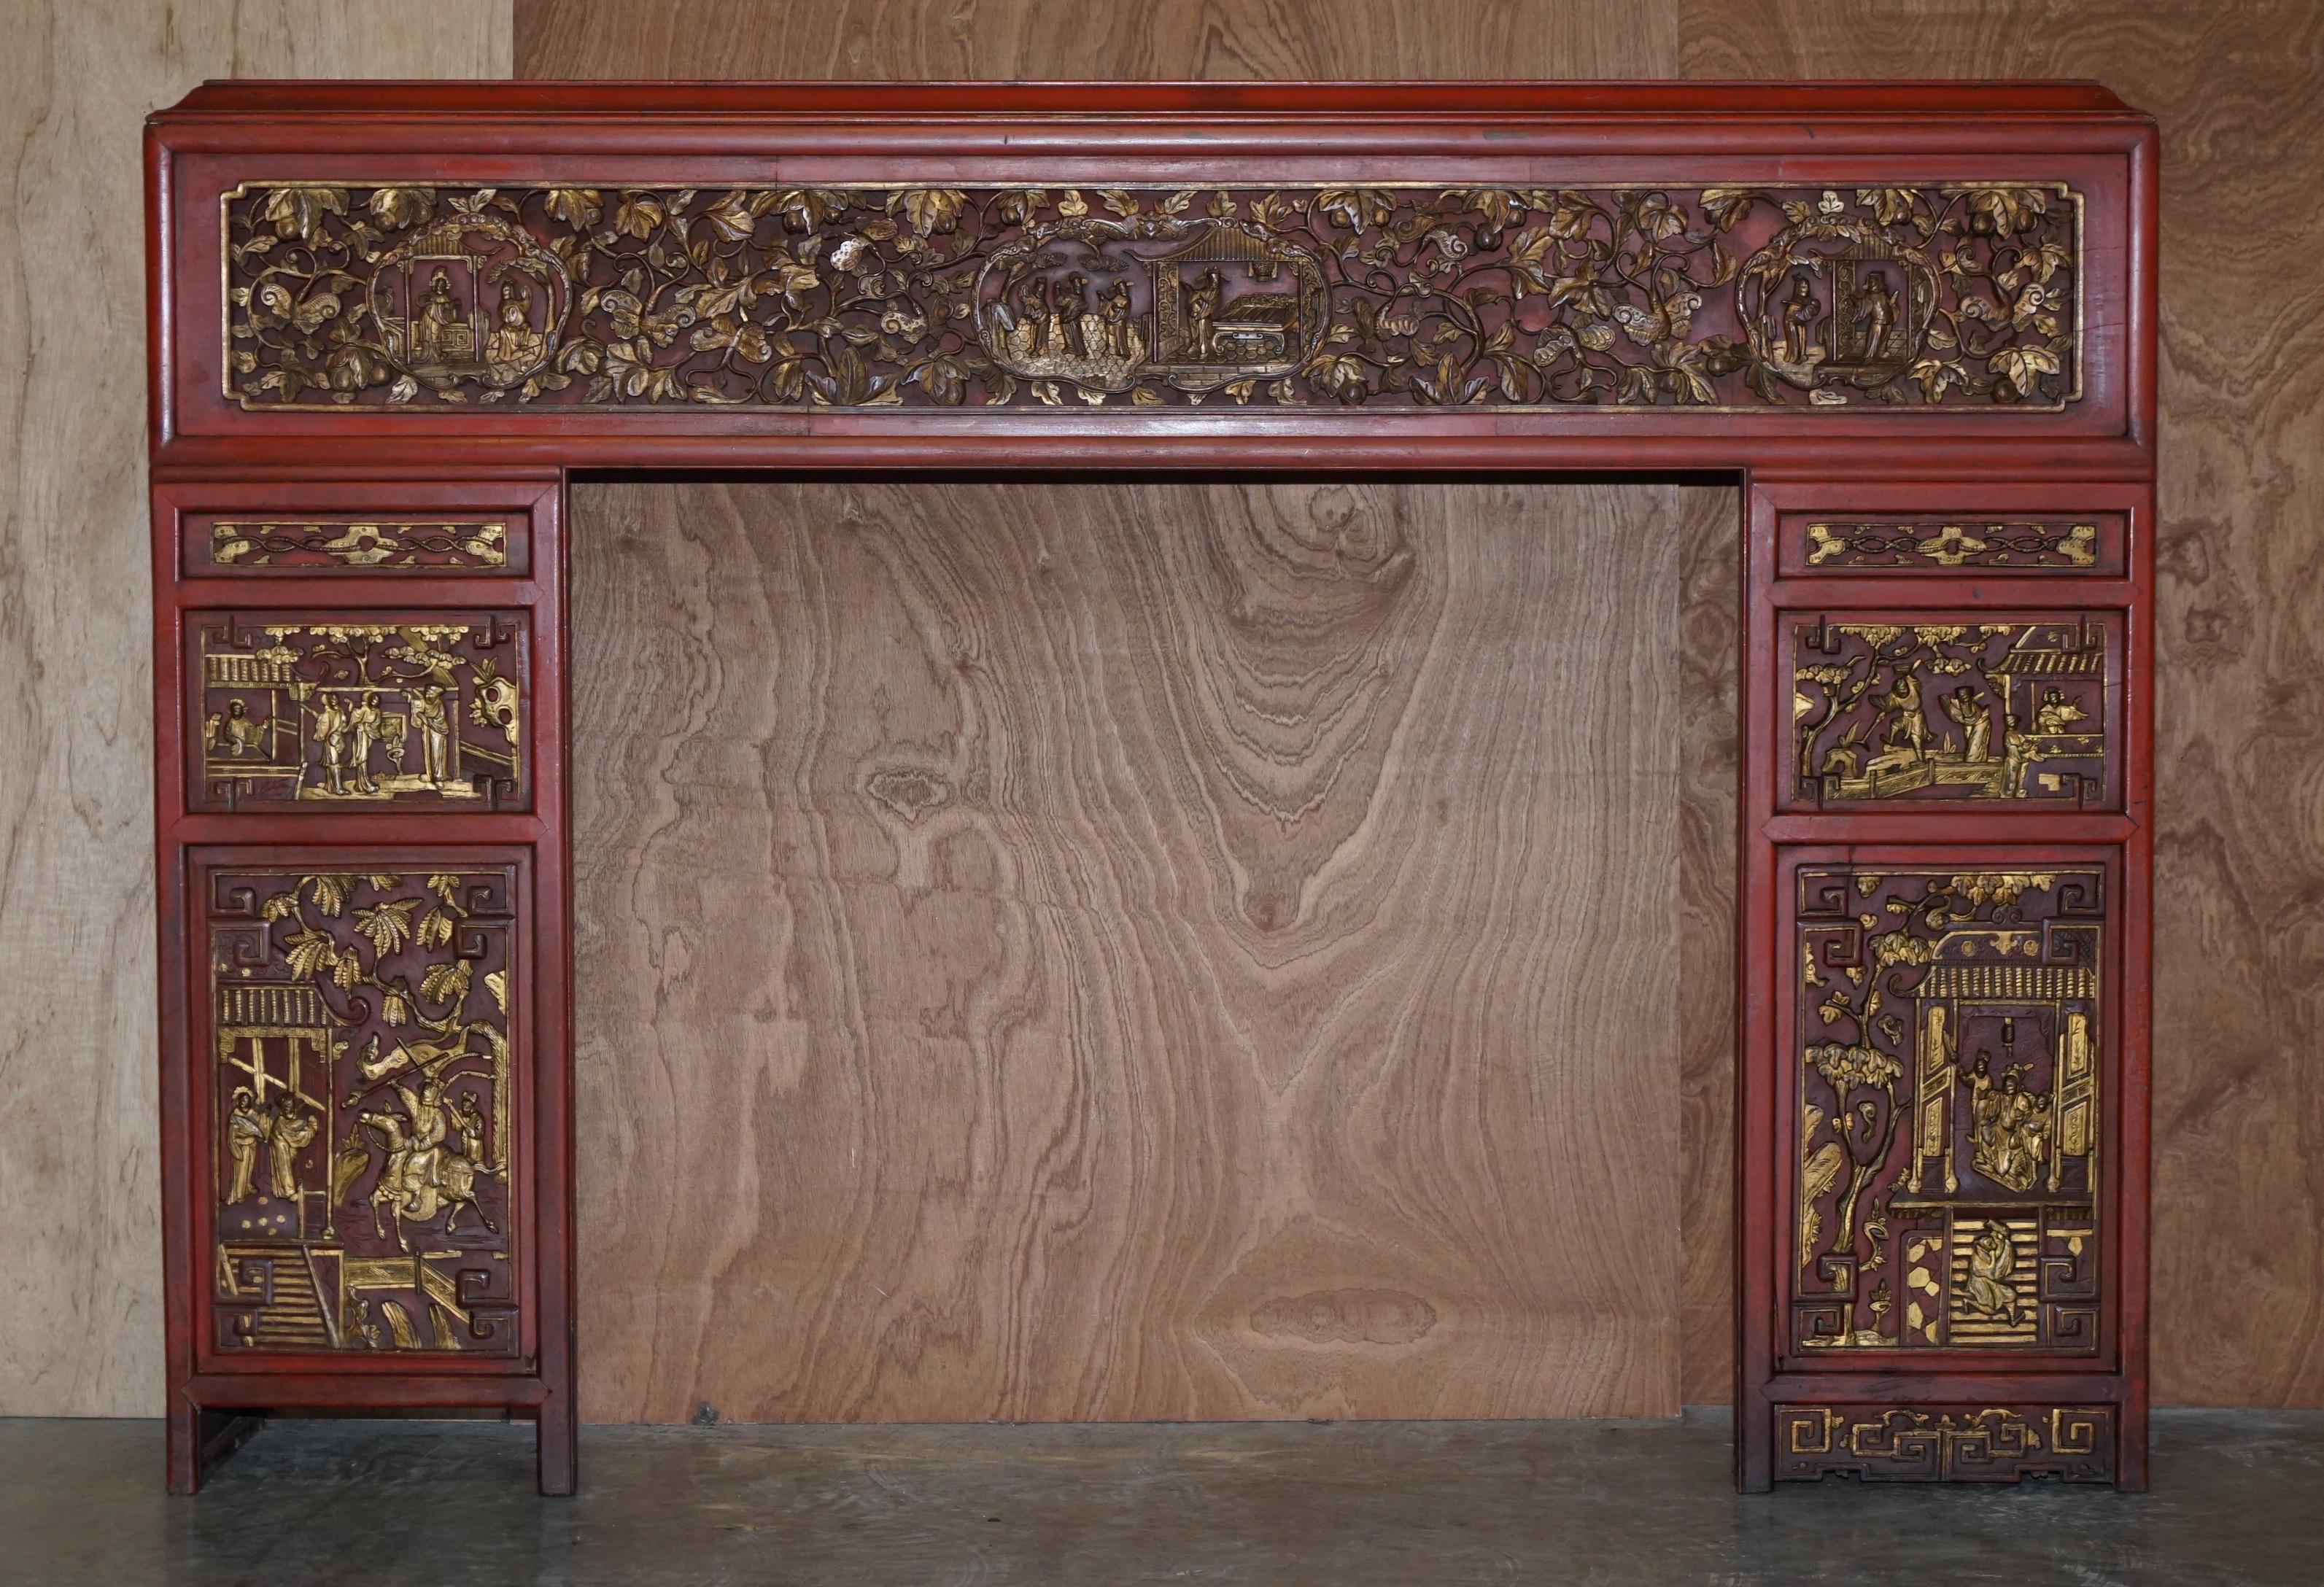 We are delighted to offer this lovely antique circa 1920 hand painted and lacquered Chinese fret work carved mantle piece fire surround

A very good looking and well made piece, these types of surrounds are now highly collectable as art furniture.